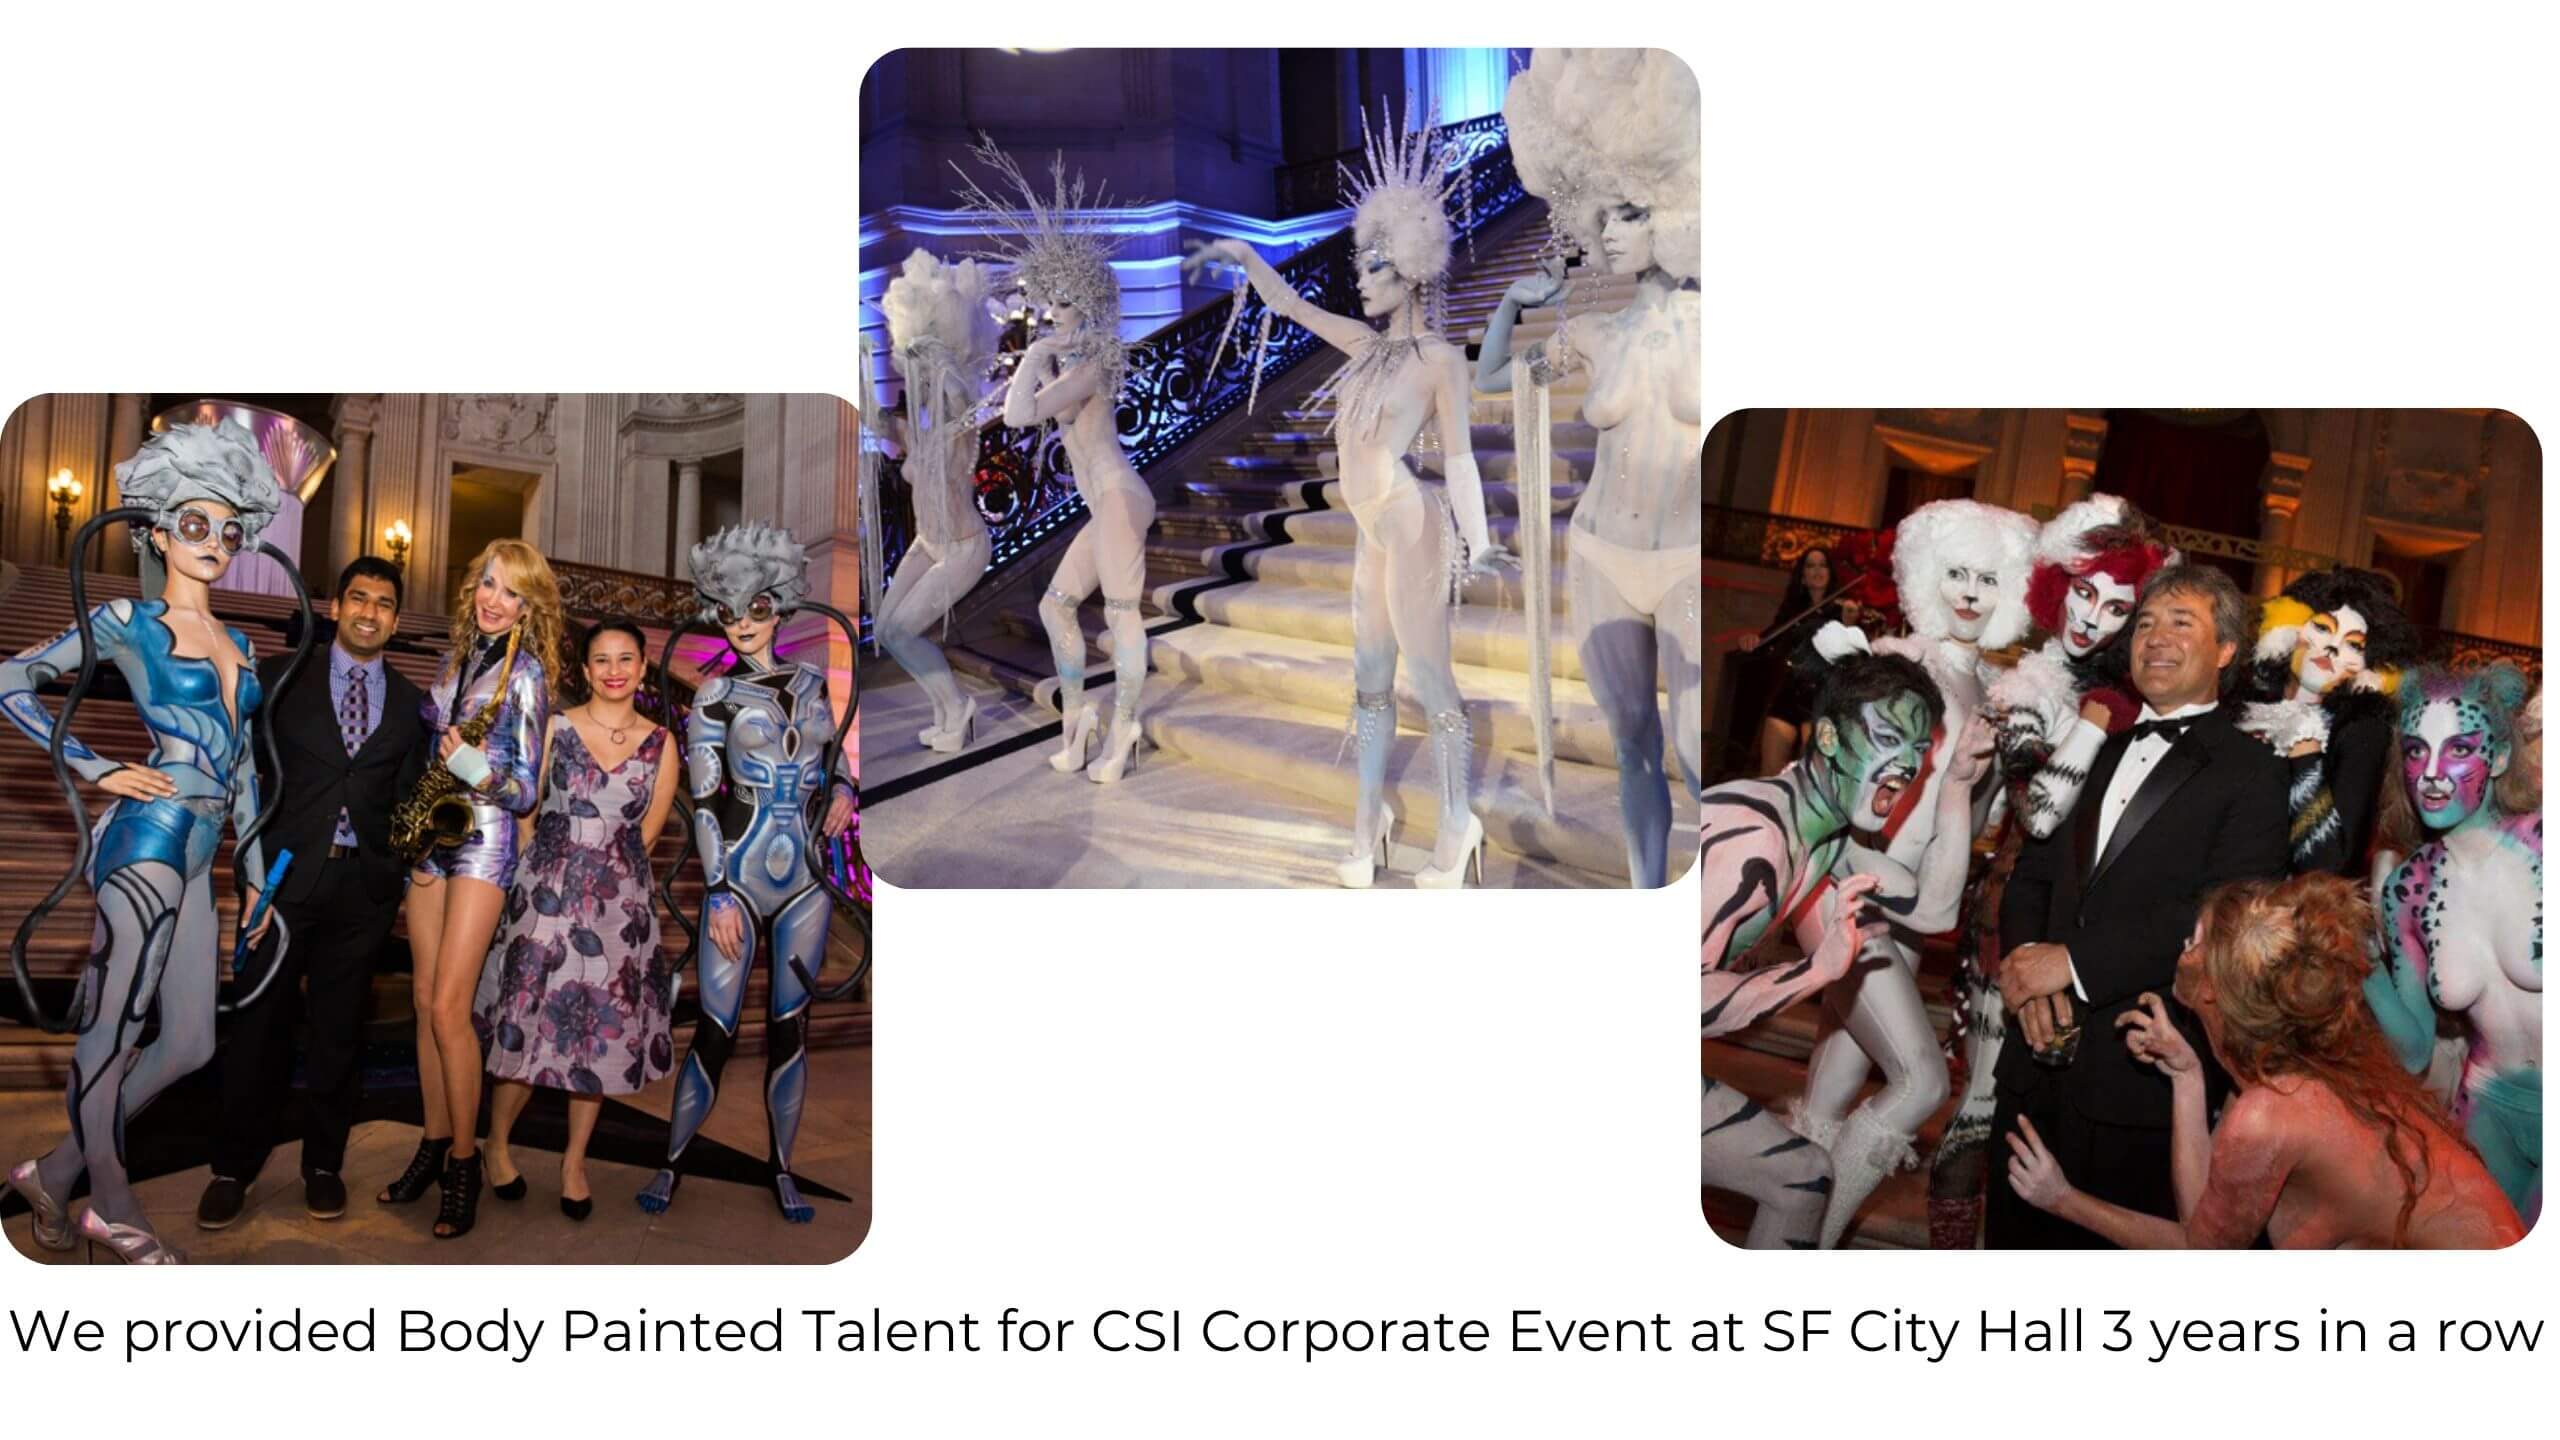 Body Painted models for Corporate Events by Catalyst Arts SF